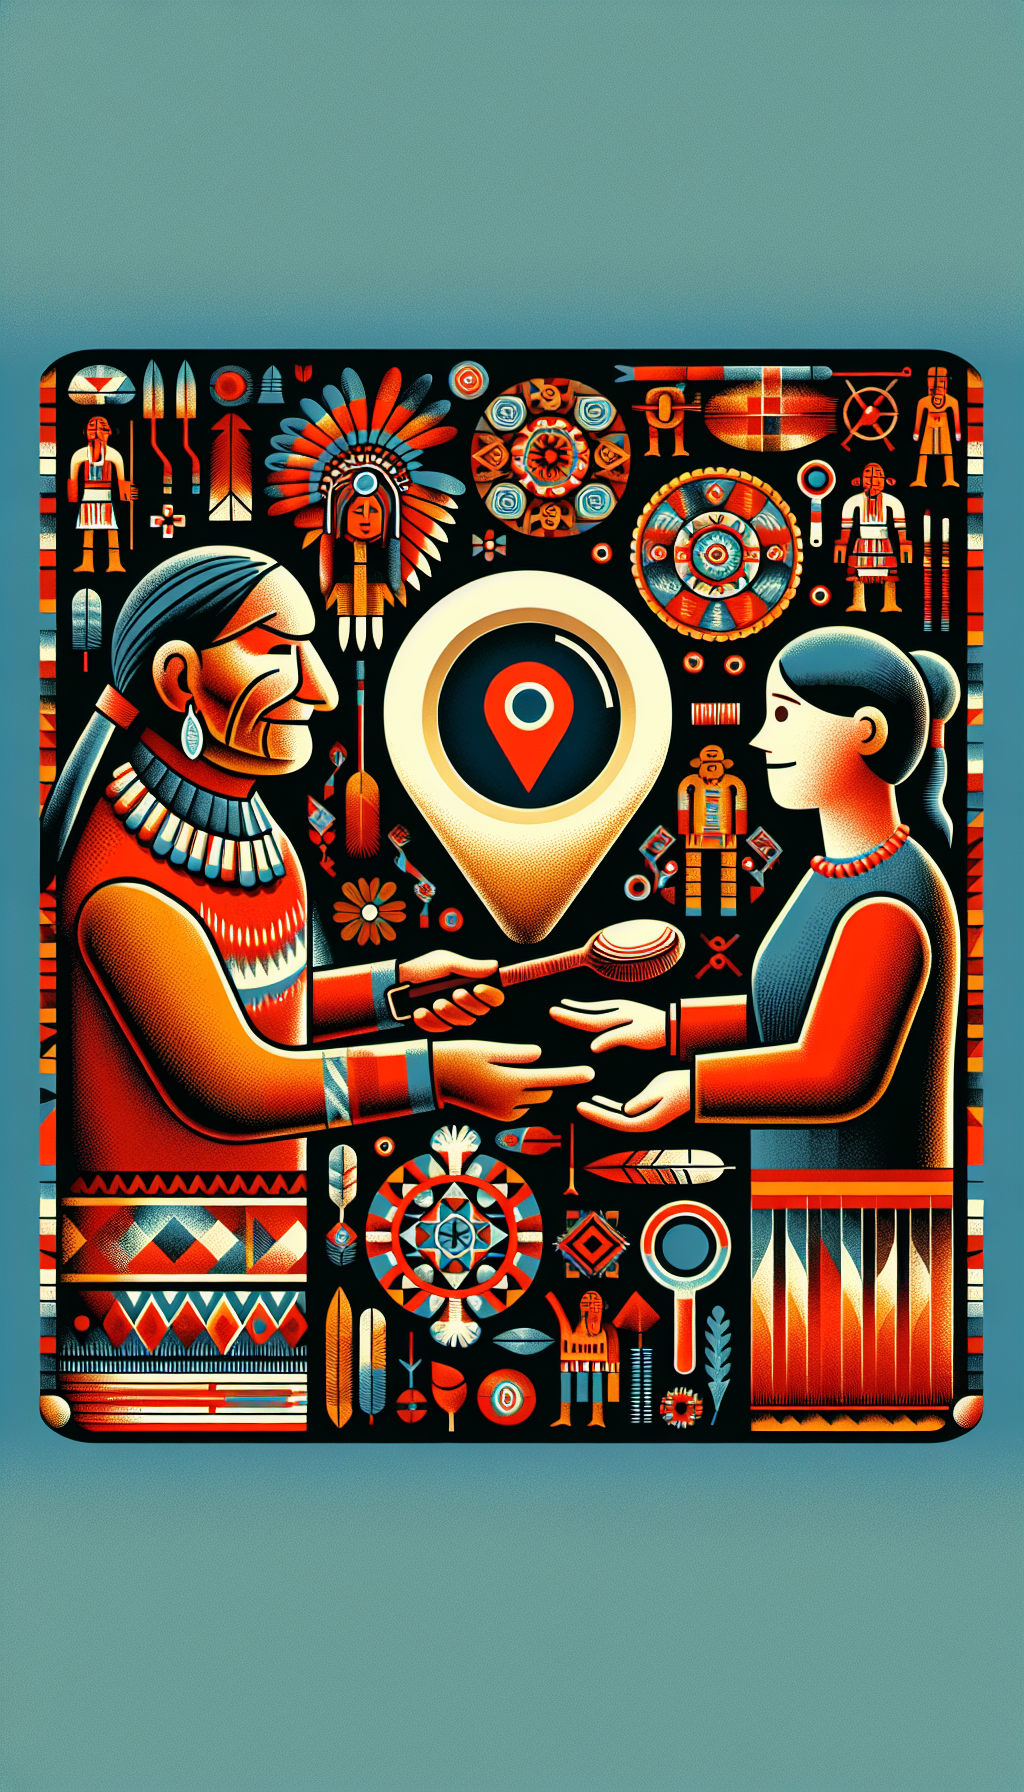 An illustration portraying a Native American elder gently handing over an ancient artifact to a modern appraiser, with magnifying glasses hovering above showing vivid scenes of the artifact's past – warriors, ceremonies, and crafts; all embedded within the contours of the object, subtly incorporating a location pin symbolizing 'near me', melding timeless history with contemporary cultural appreciation.